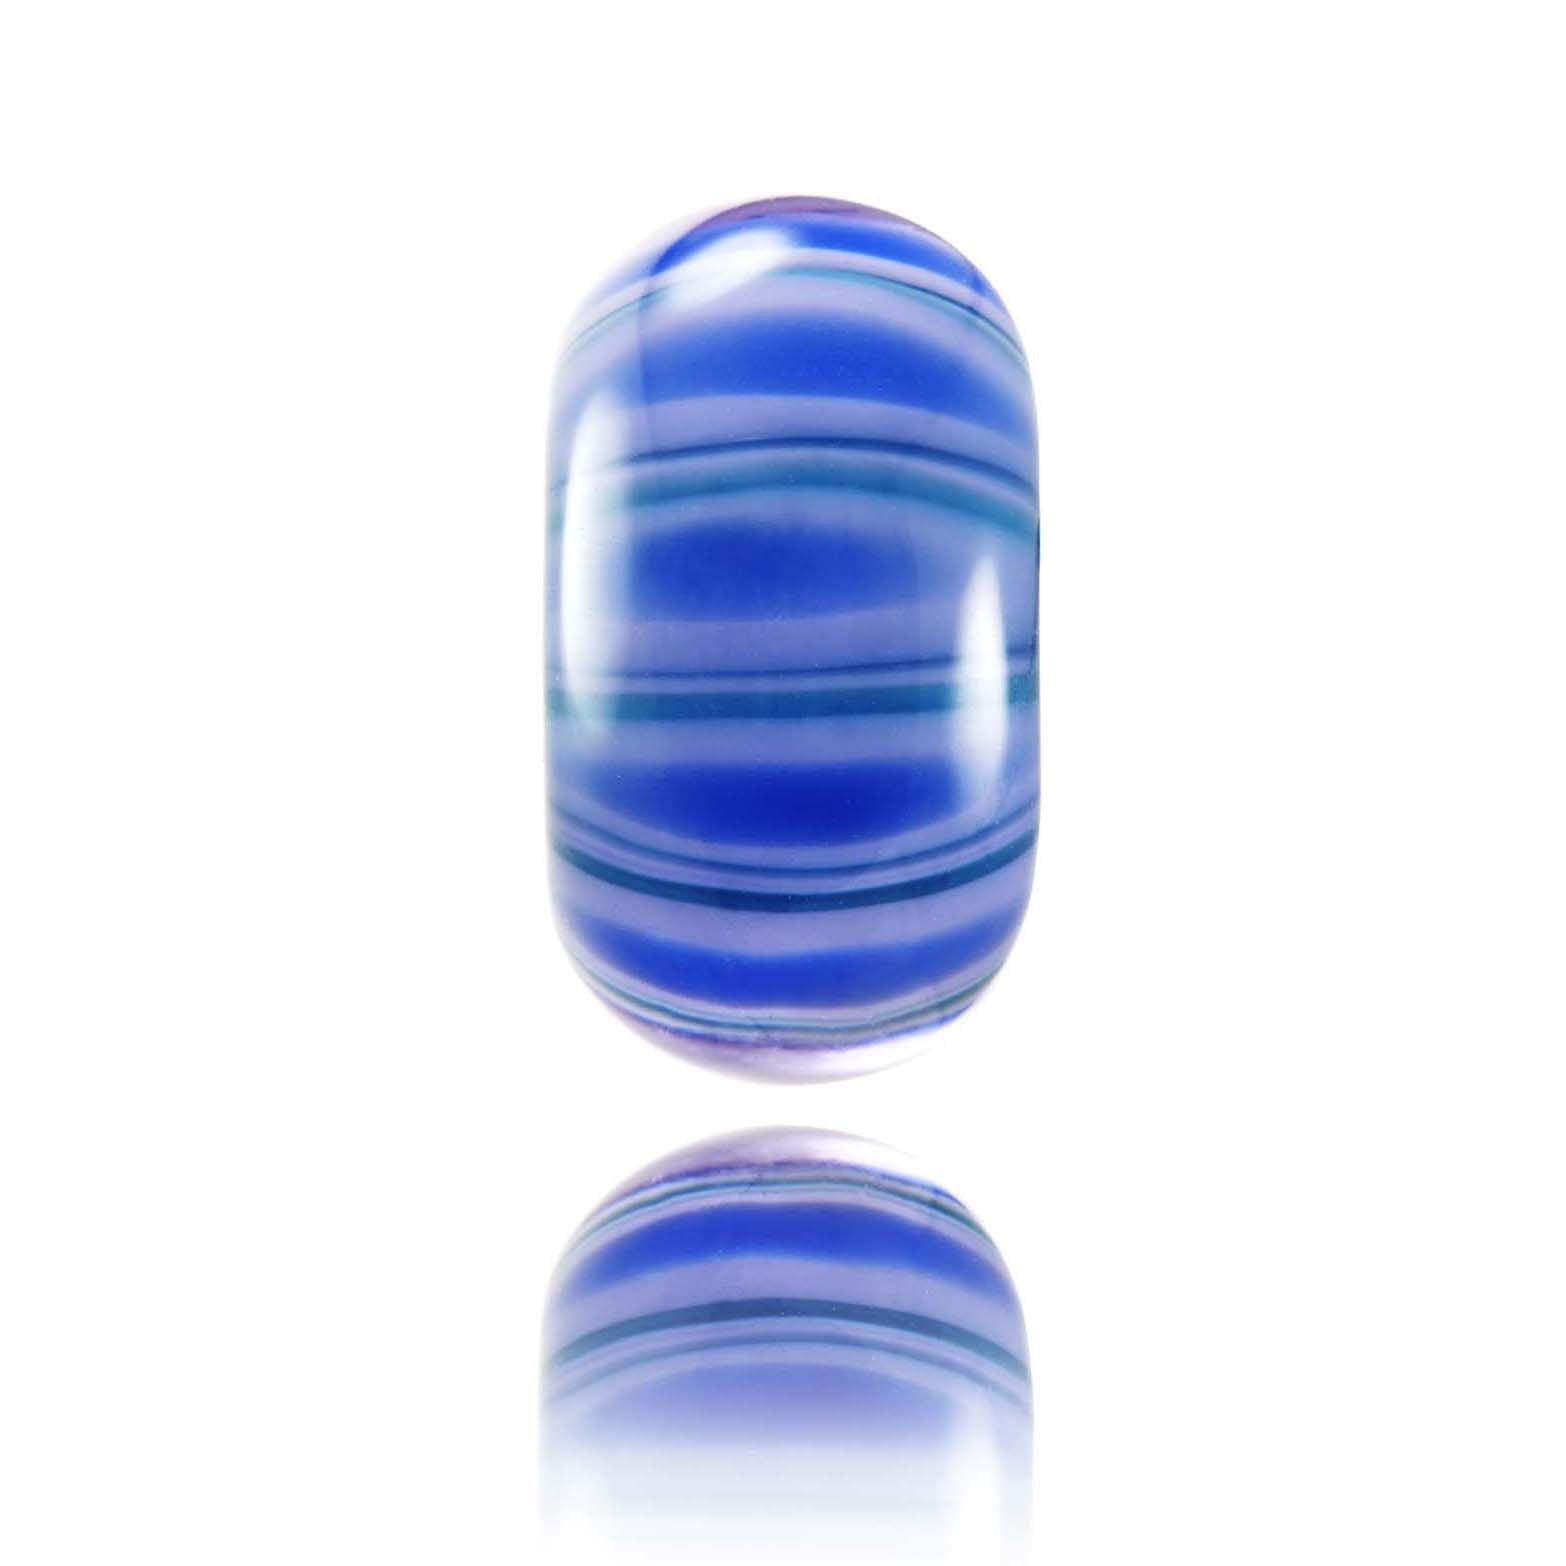 Stripey blue and purple Murano glass bead inspired by the surf beach at Anglet in France.